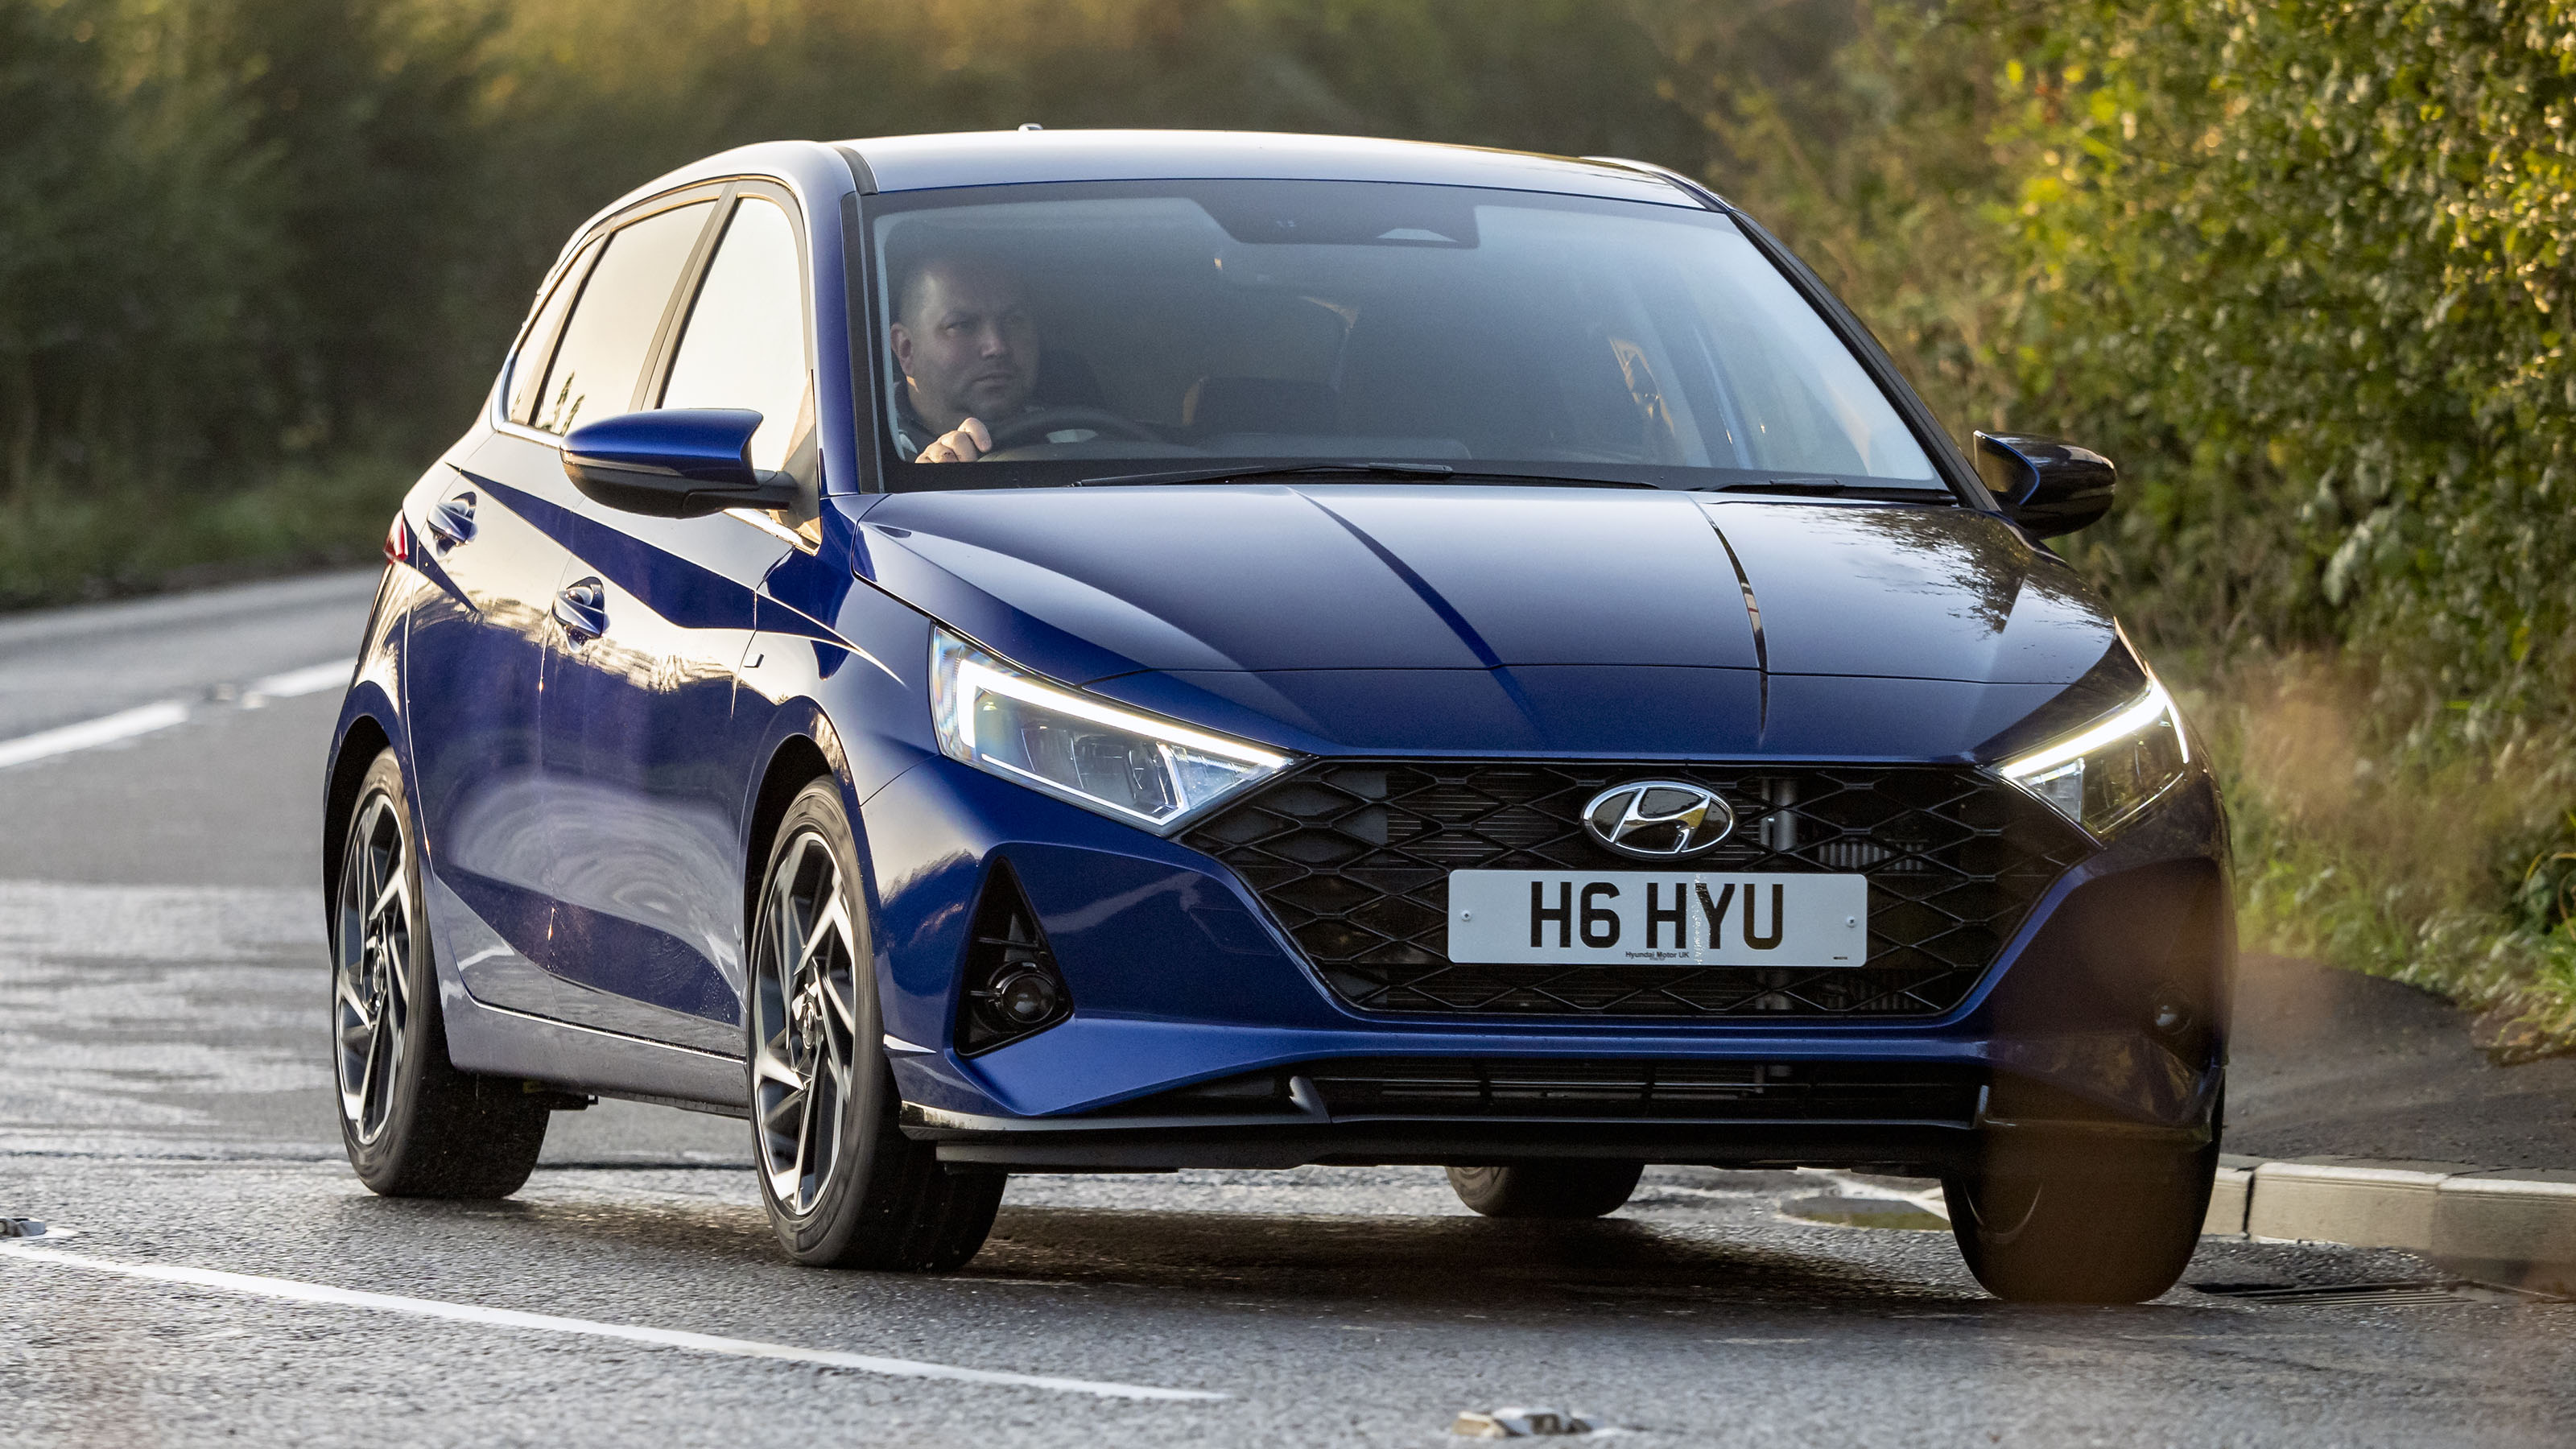 2020 Hyundai i20 hatchback prices, specs and release date Carbuyer